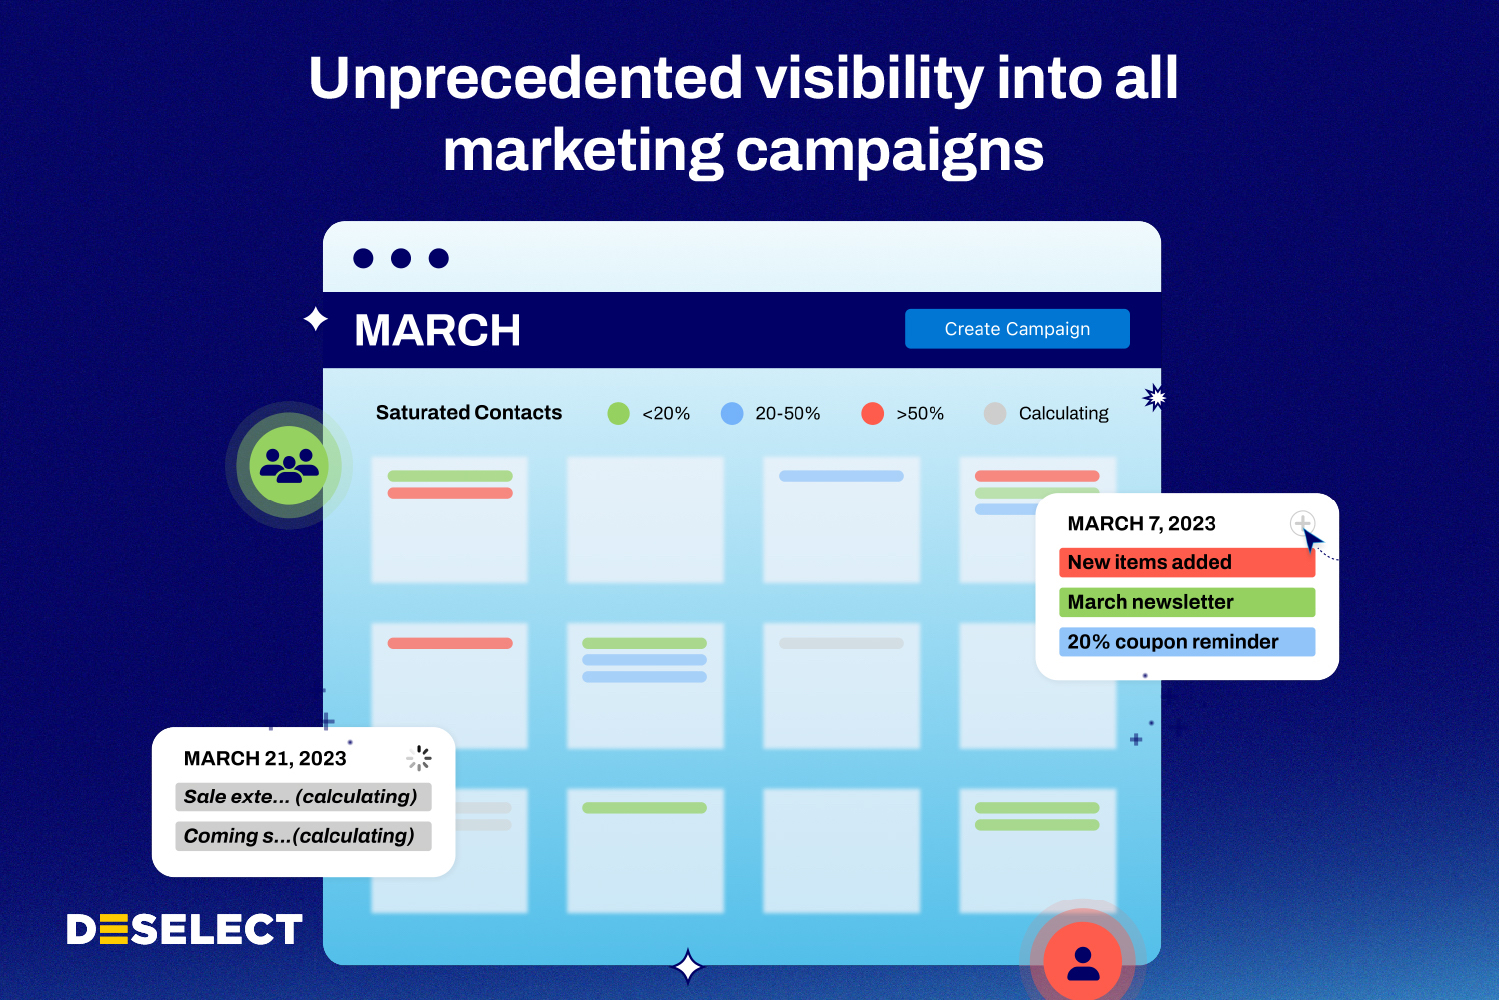 DESelect Engage - Unprecedented visibility into all marketing campaigns